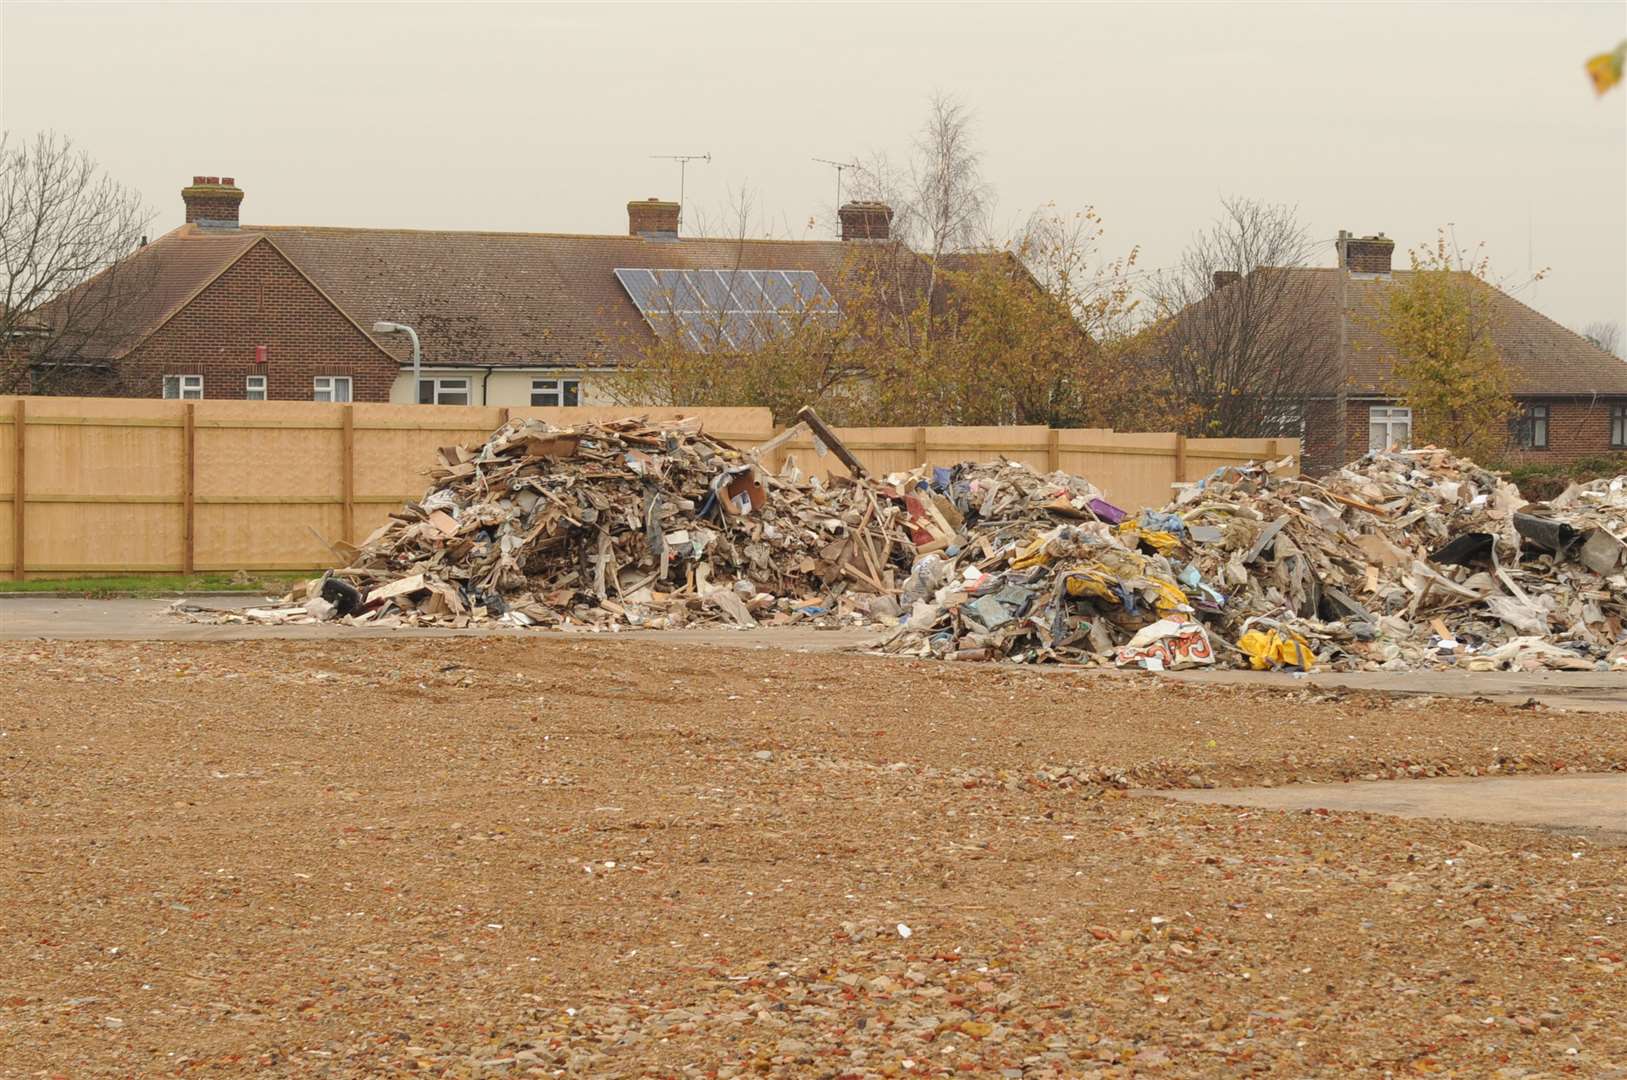 Tons of rubbish have been dumped at the site